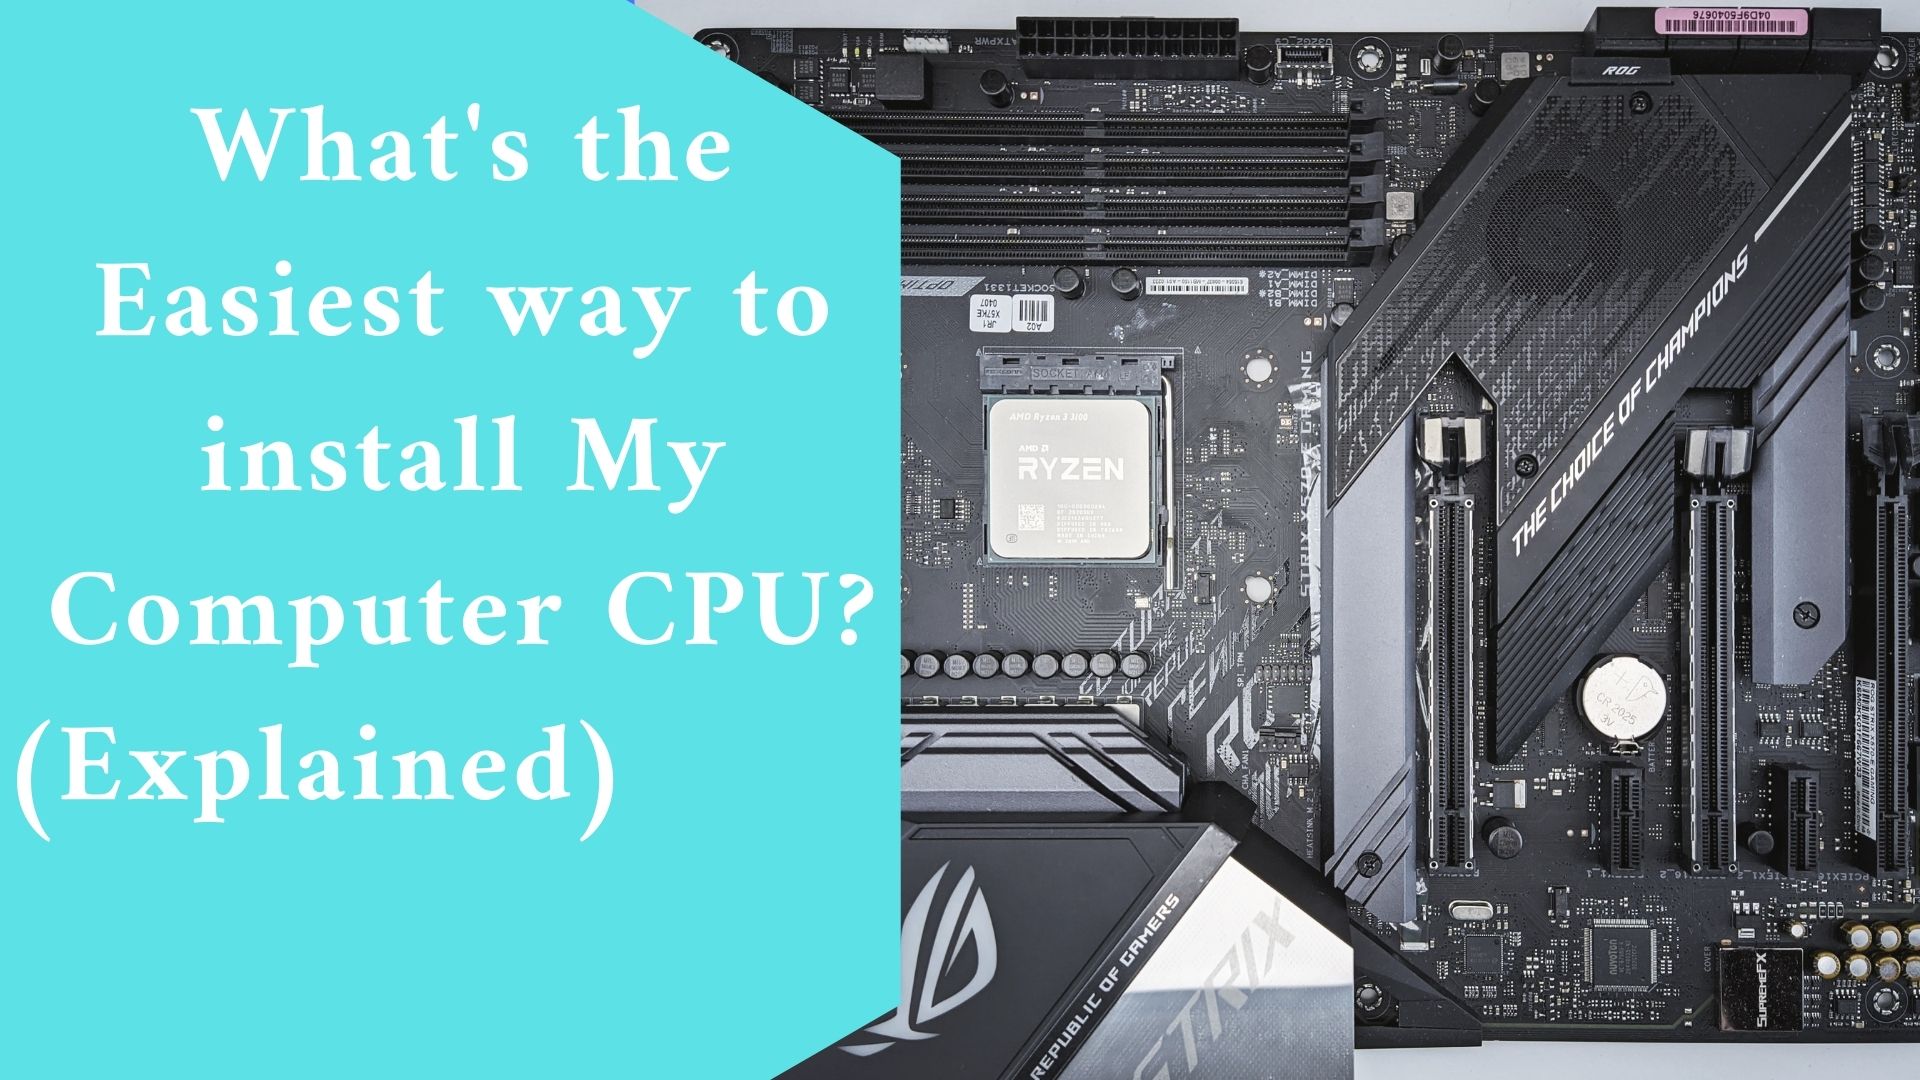 What's the Easiest way to install My Computer CPU? (Explained)